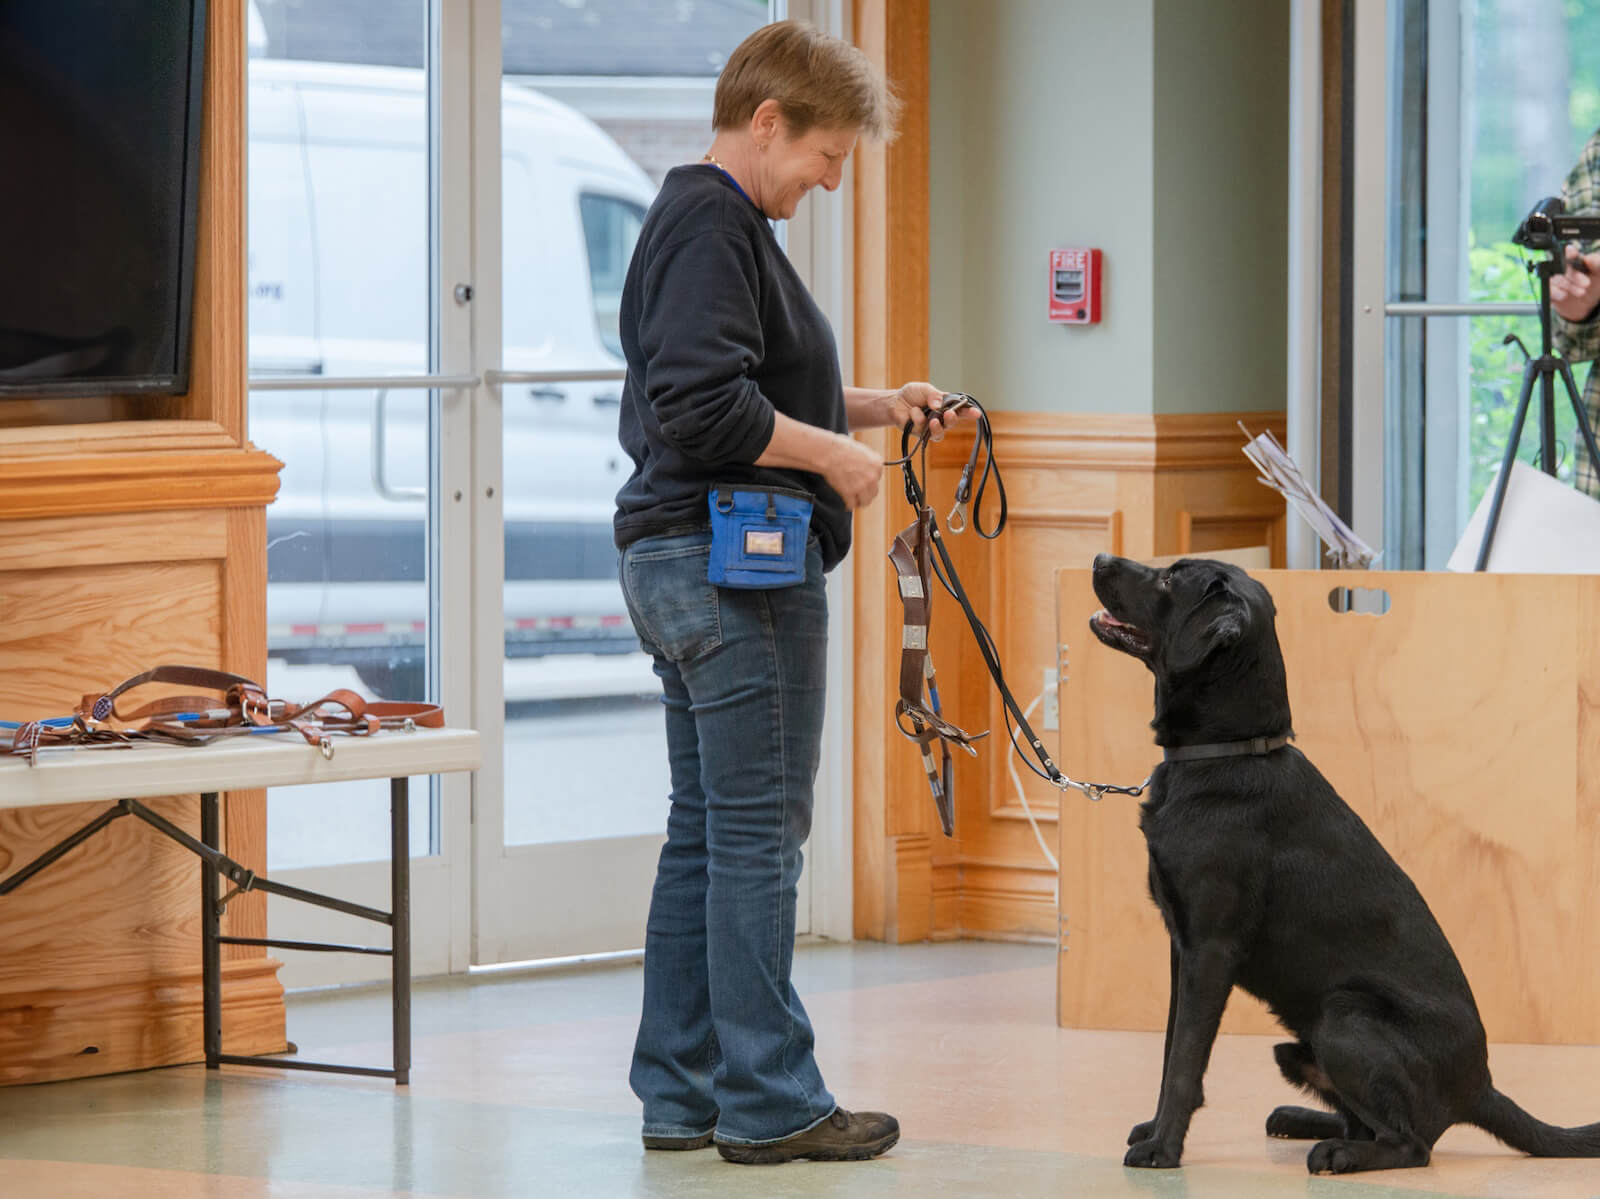 At IFT staff looks down at black Lab while offering guide dog harness